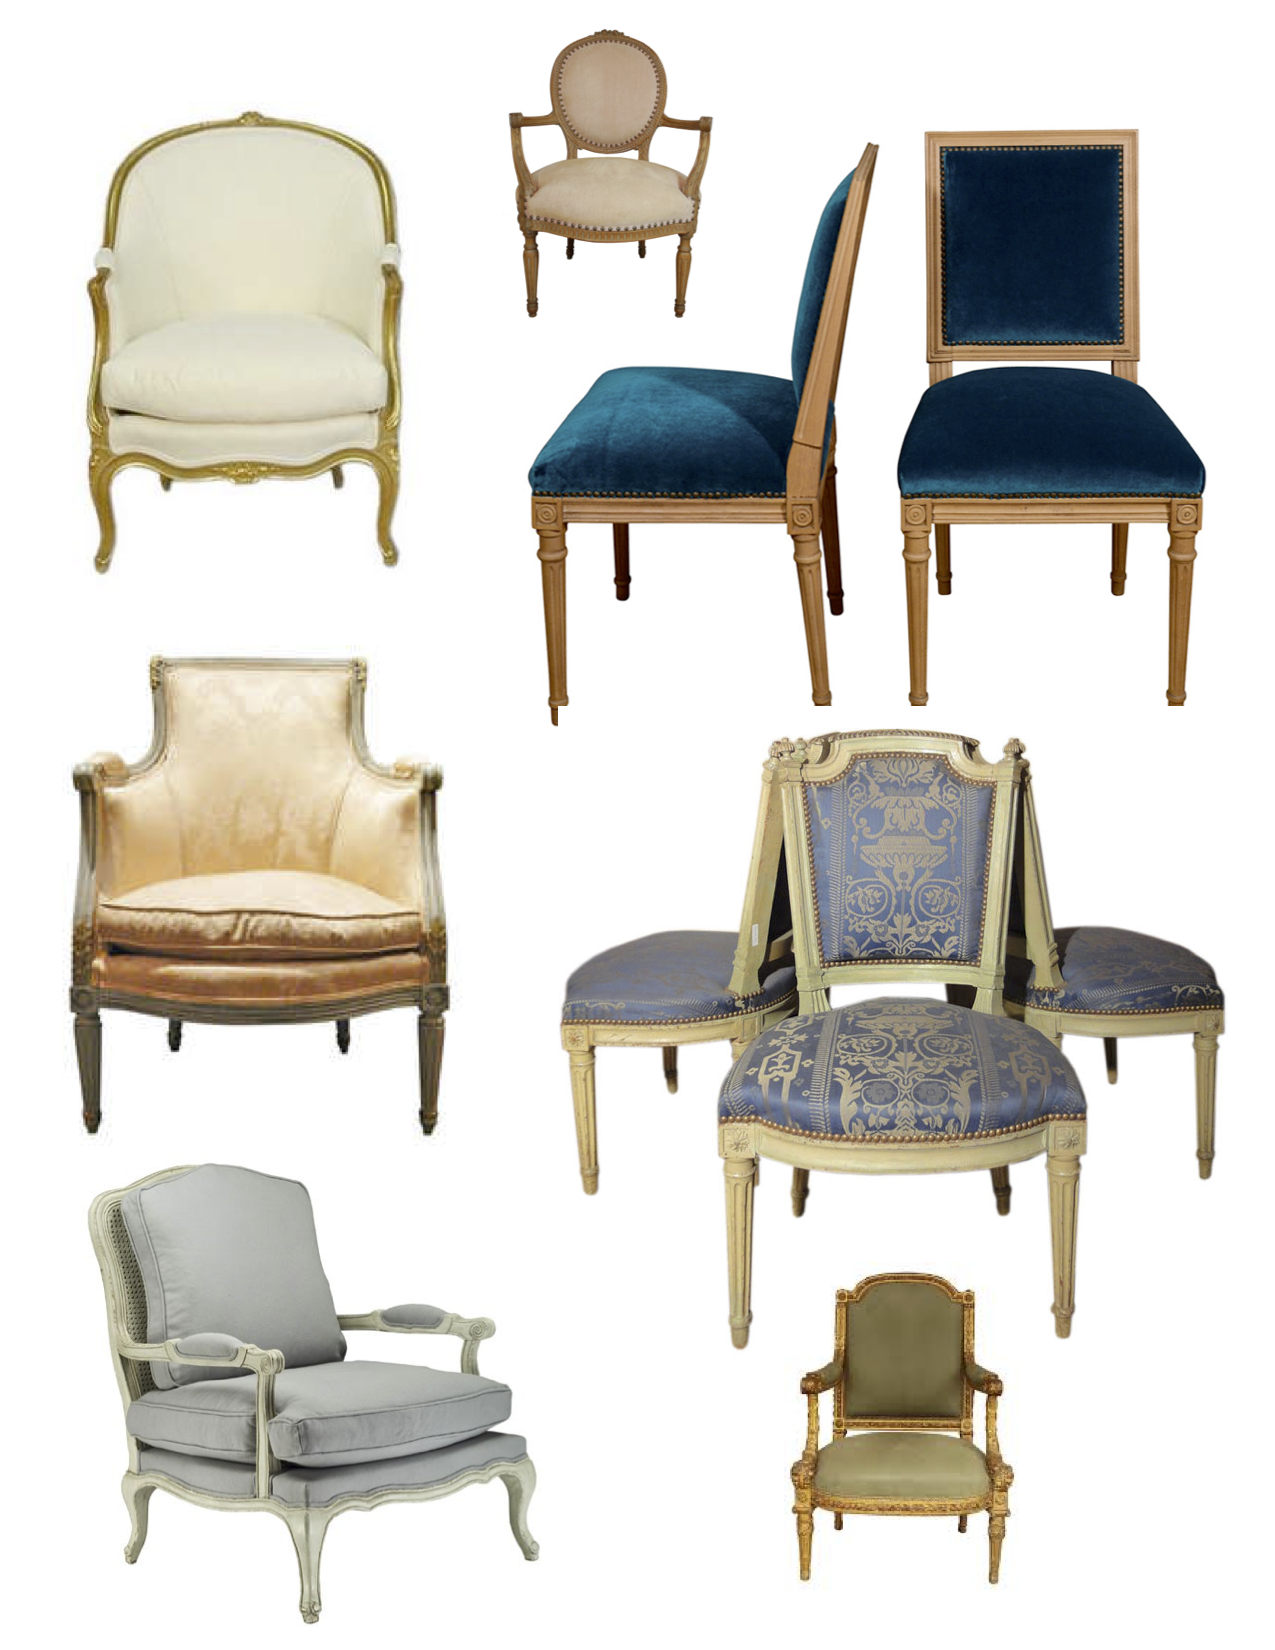 French By Royal Design The Louis Fauteuil Bergere Chair